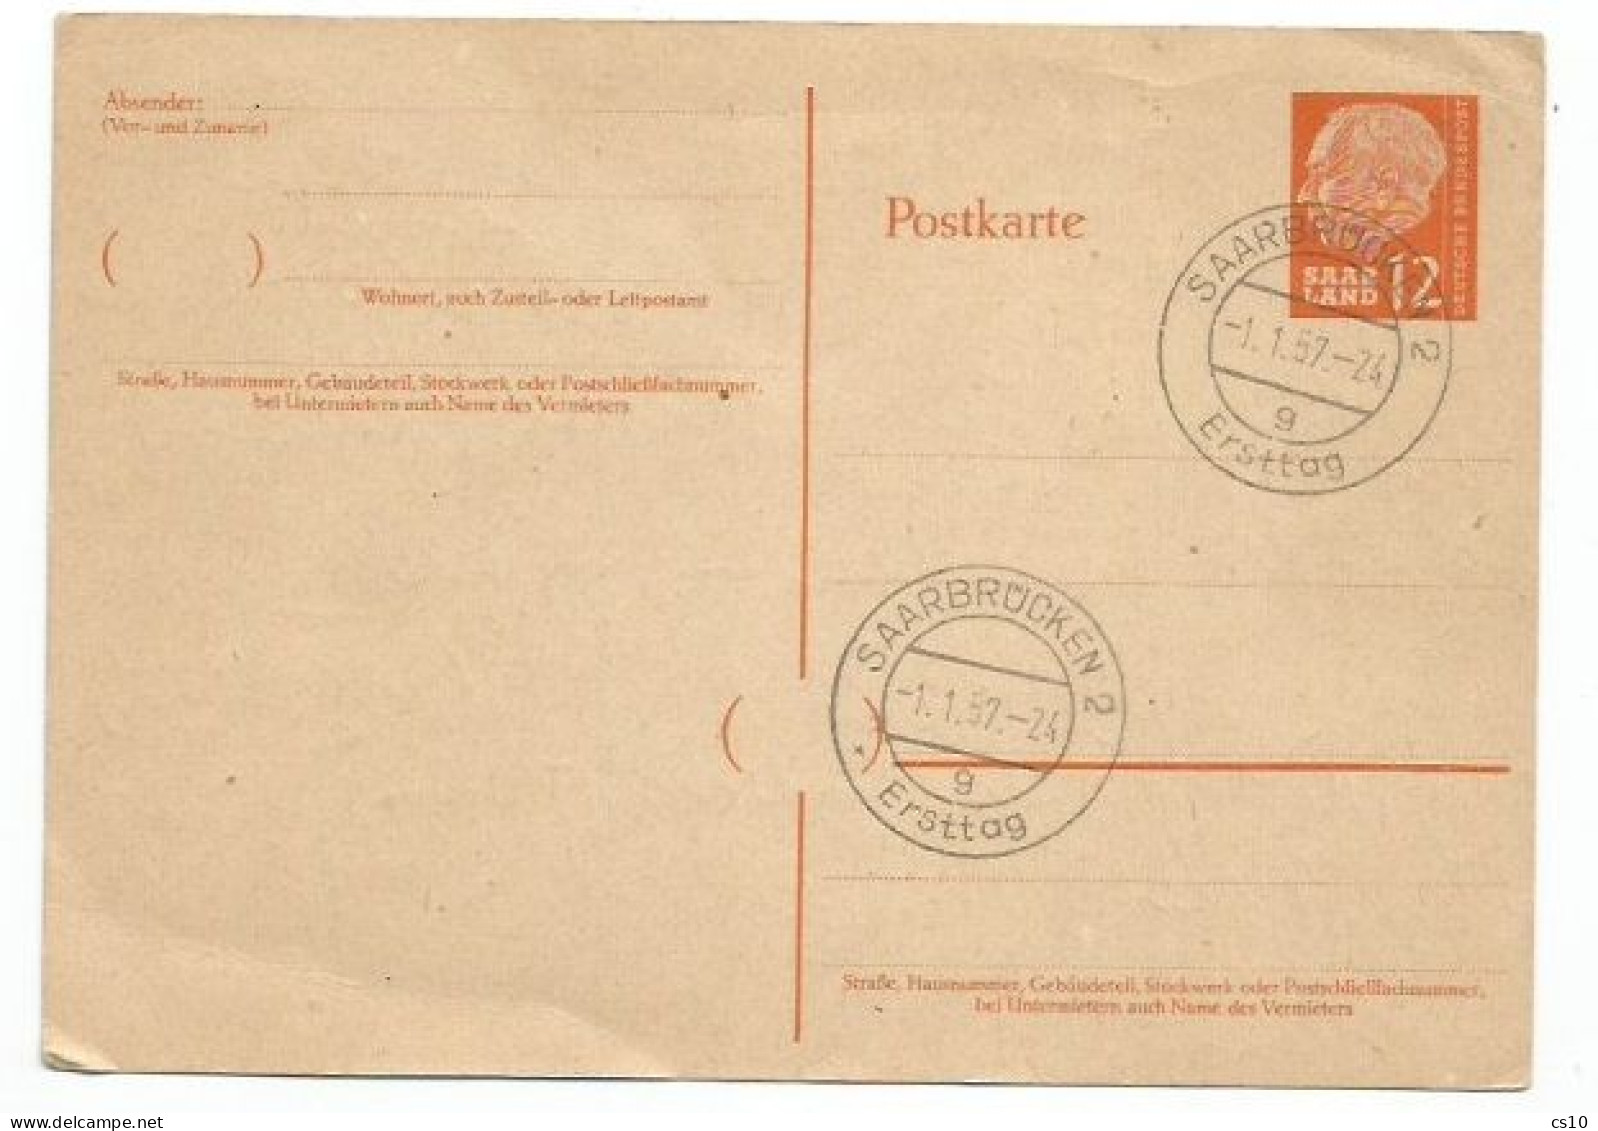 SaarLand PSC Card  President Heuss 12F With PMK Erstag 1jan1957 "Back To Germany" Day - Covers & Documents